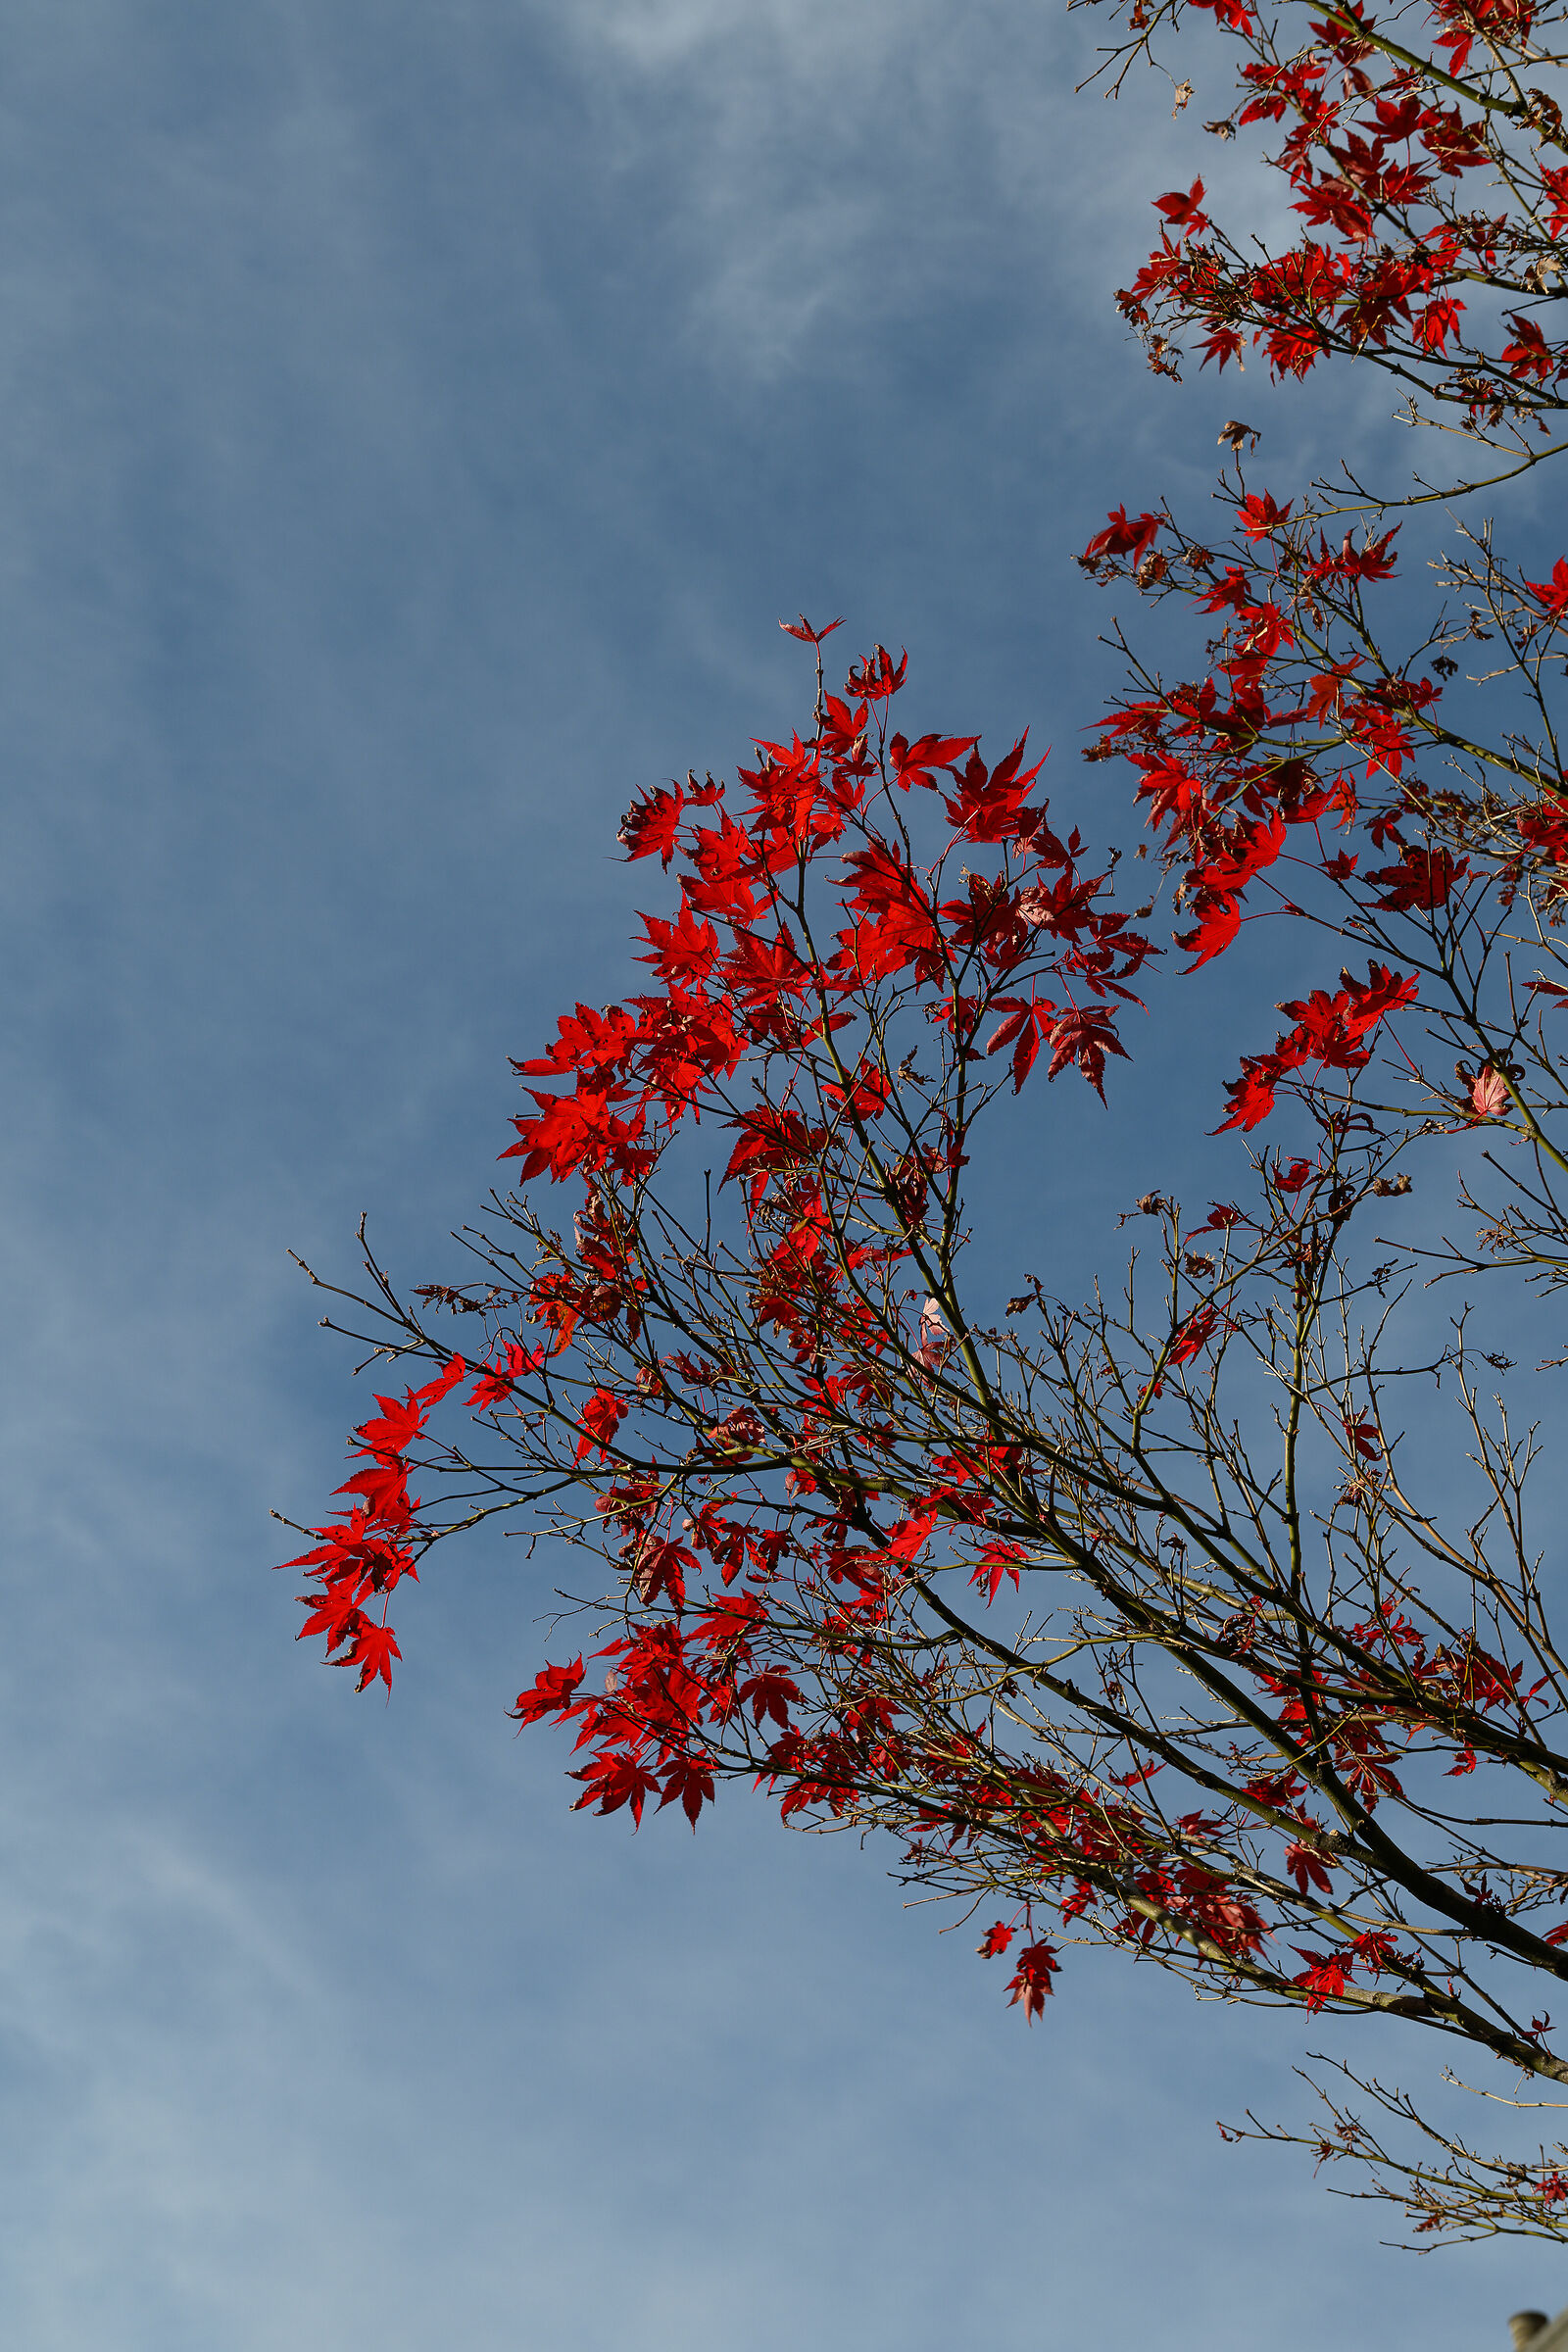 The fire leaves of the maple...